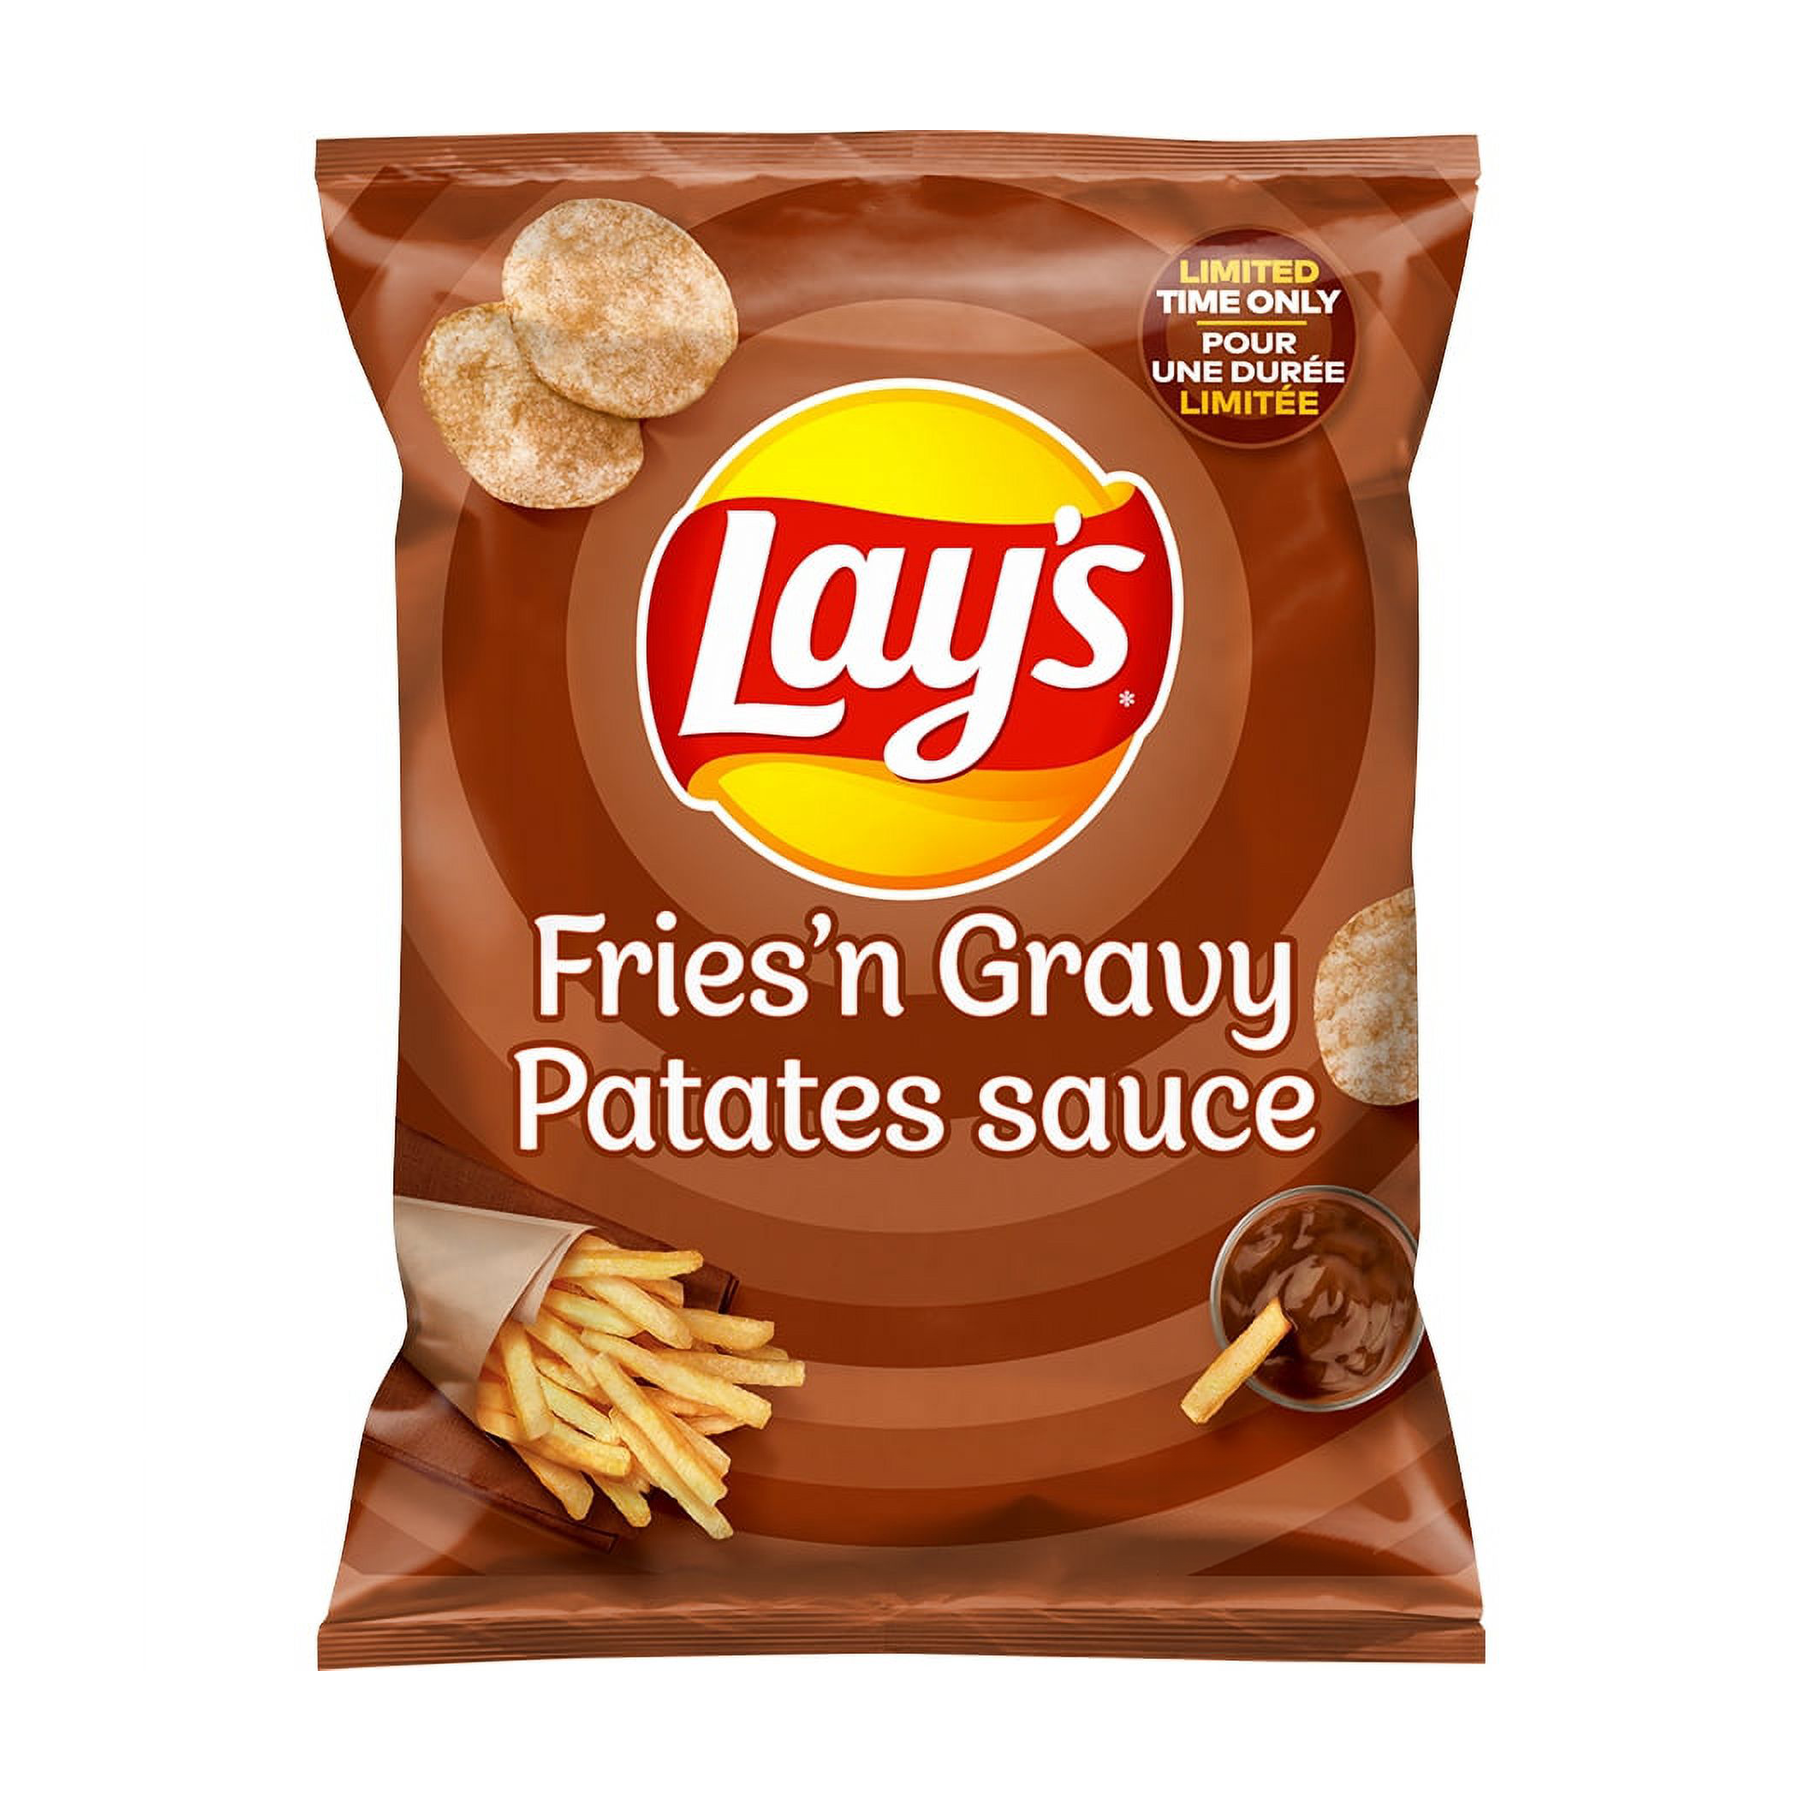 Lays Fries N Gravy Patates Sauce Flavored Chips